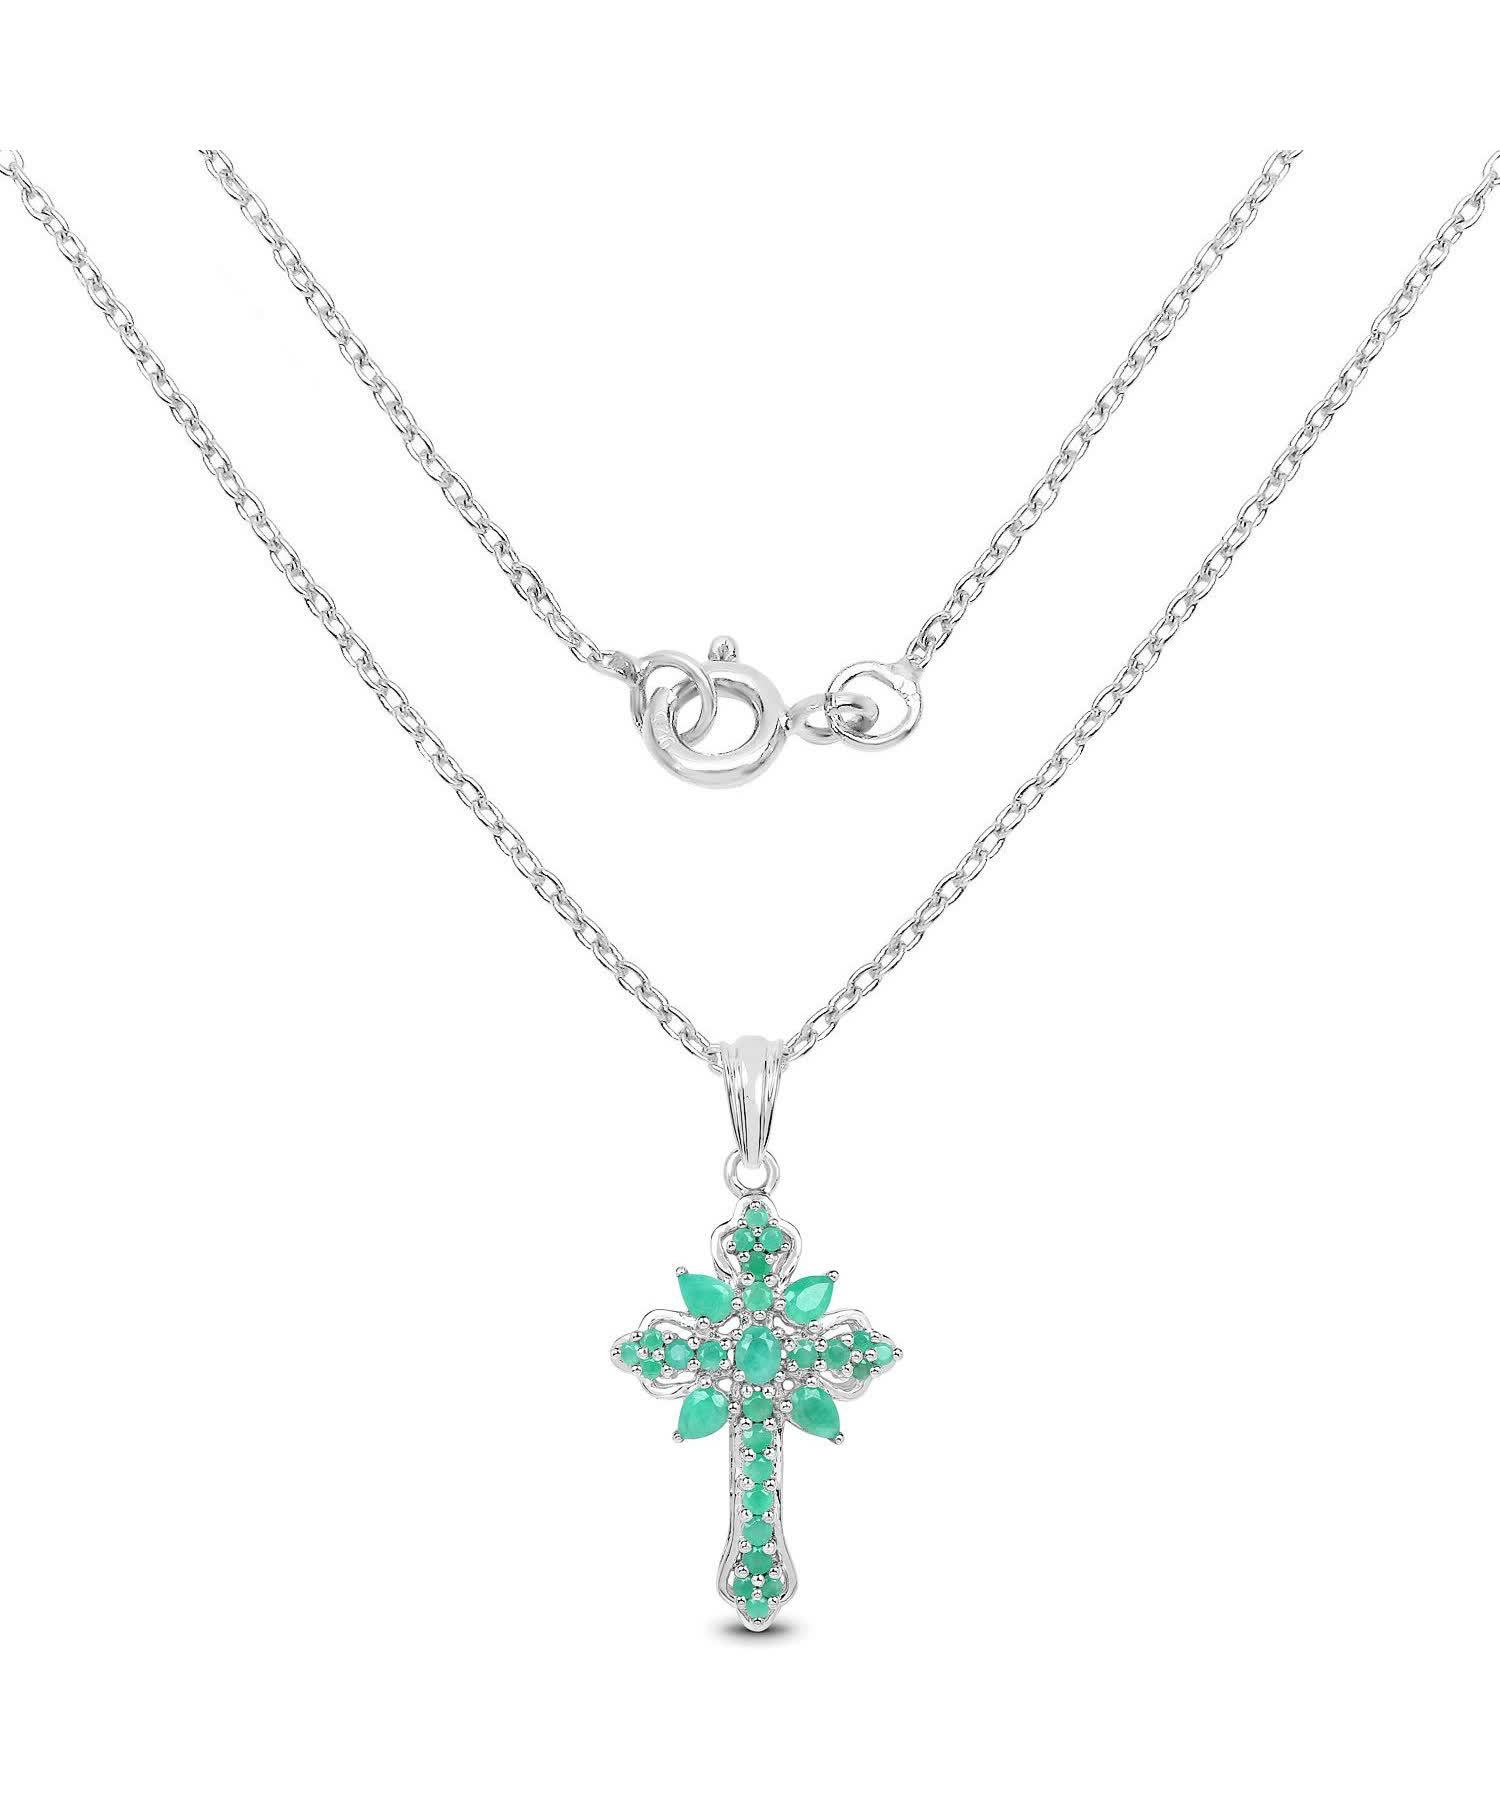 1.26ctw Natural Emerald Rhodium Plated 925 Sterling Silver Cross Pendant With Chain View 2